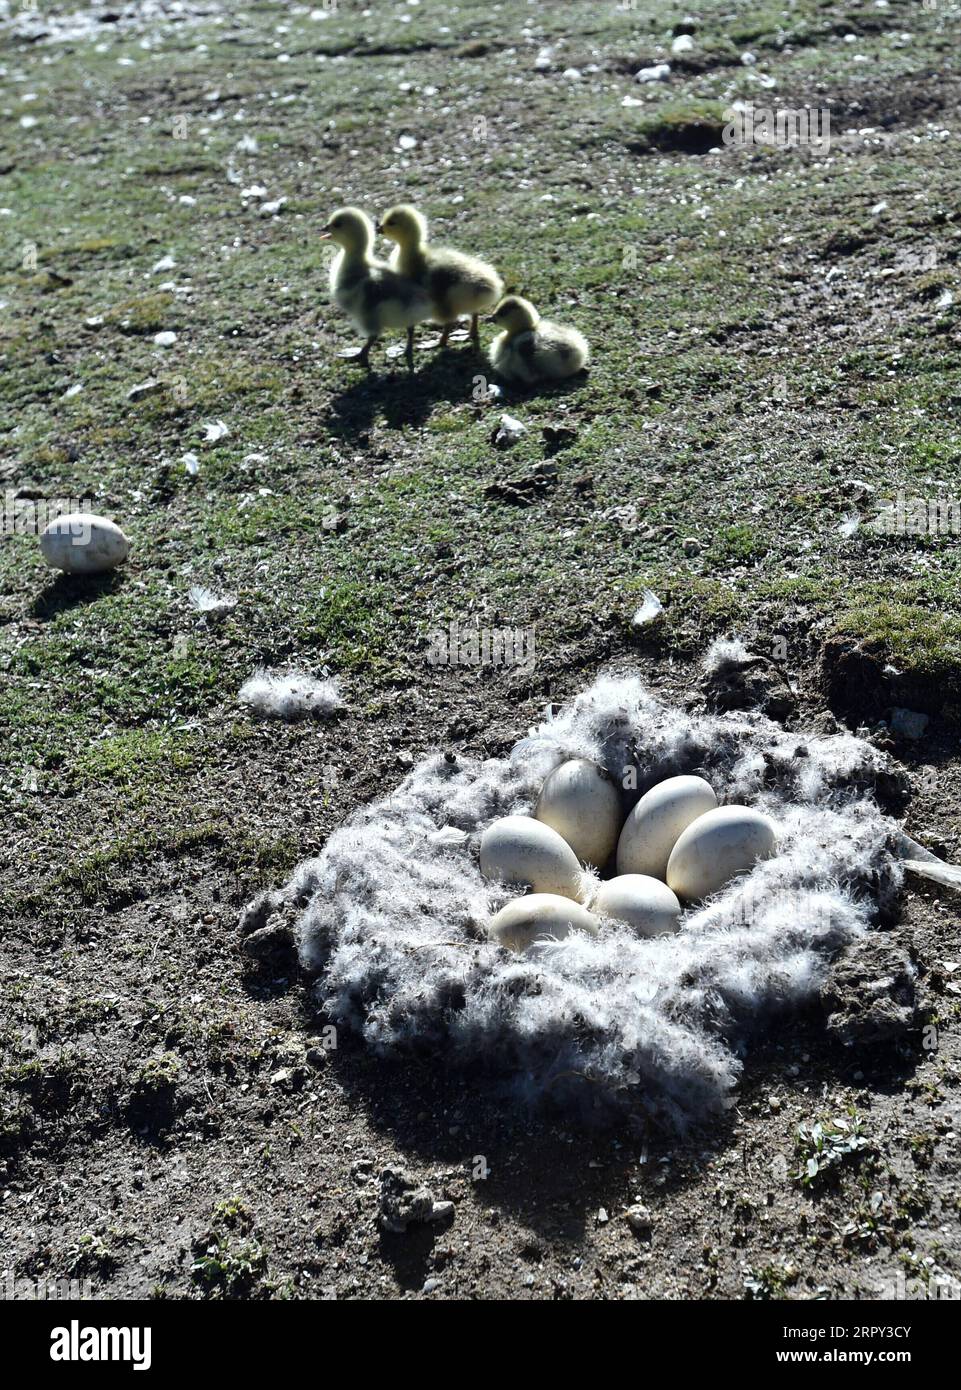 200612 -- AMDO, June 12, 2020 -- Photo taken on June 9, 2020 shows young bar-headed geese and eggs at a bird island in Amdo County, southwest China s Tibet Autonomous Region.  CHINA-TIBET-AMDO-BIRDS CN Chogo PUBLICATIONxNOTxINxCHN Stock Photo